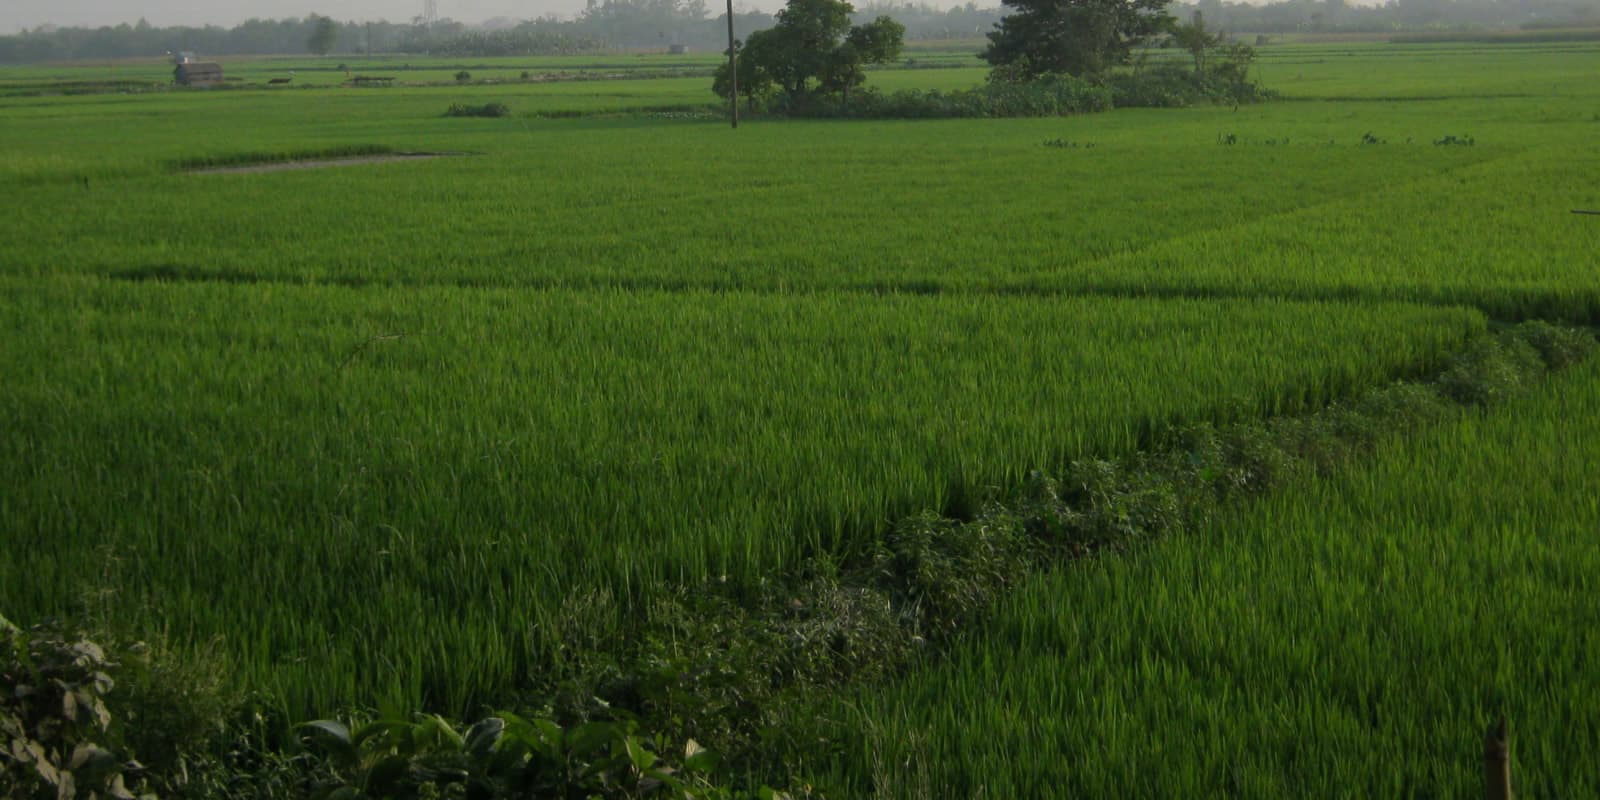 Get the Authentic Rural Experience Of Bangaldesh